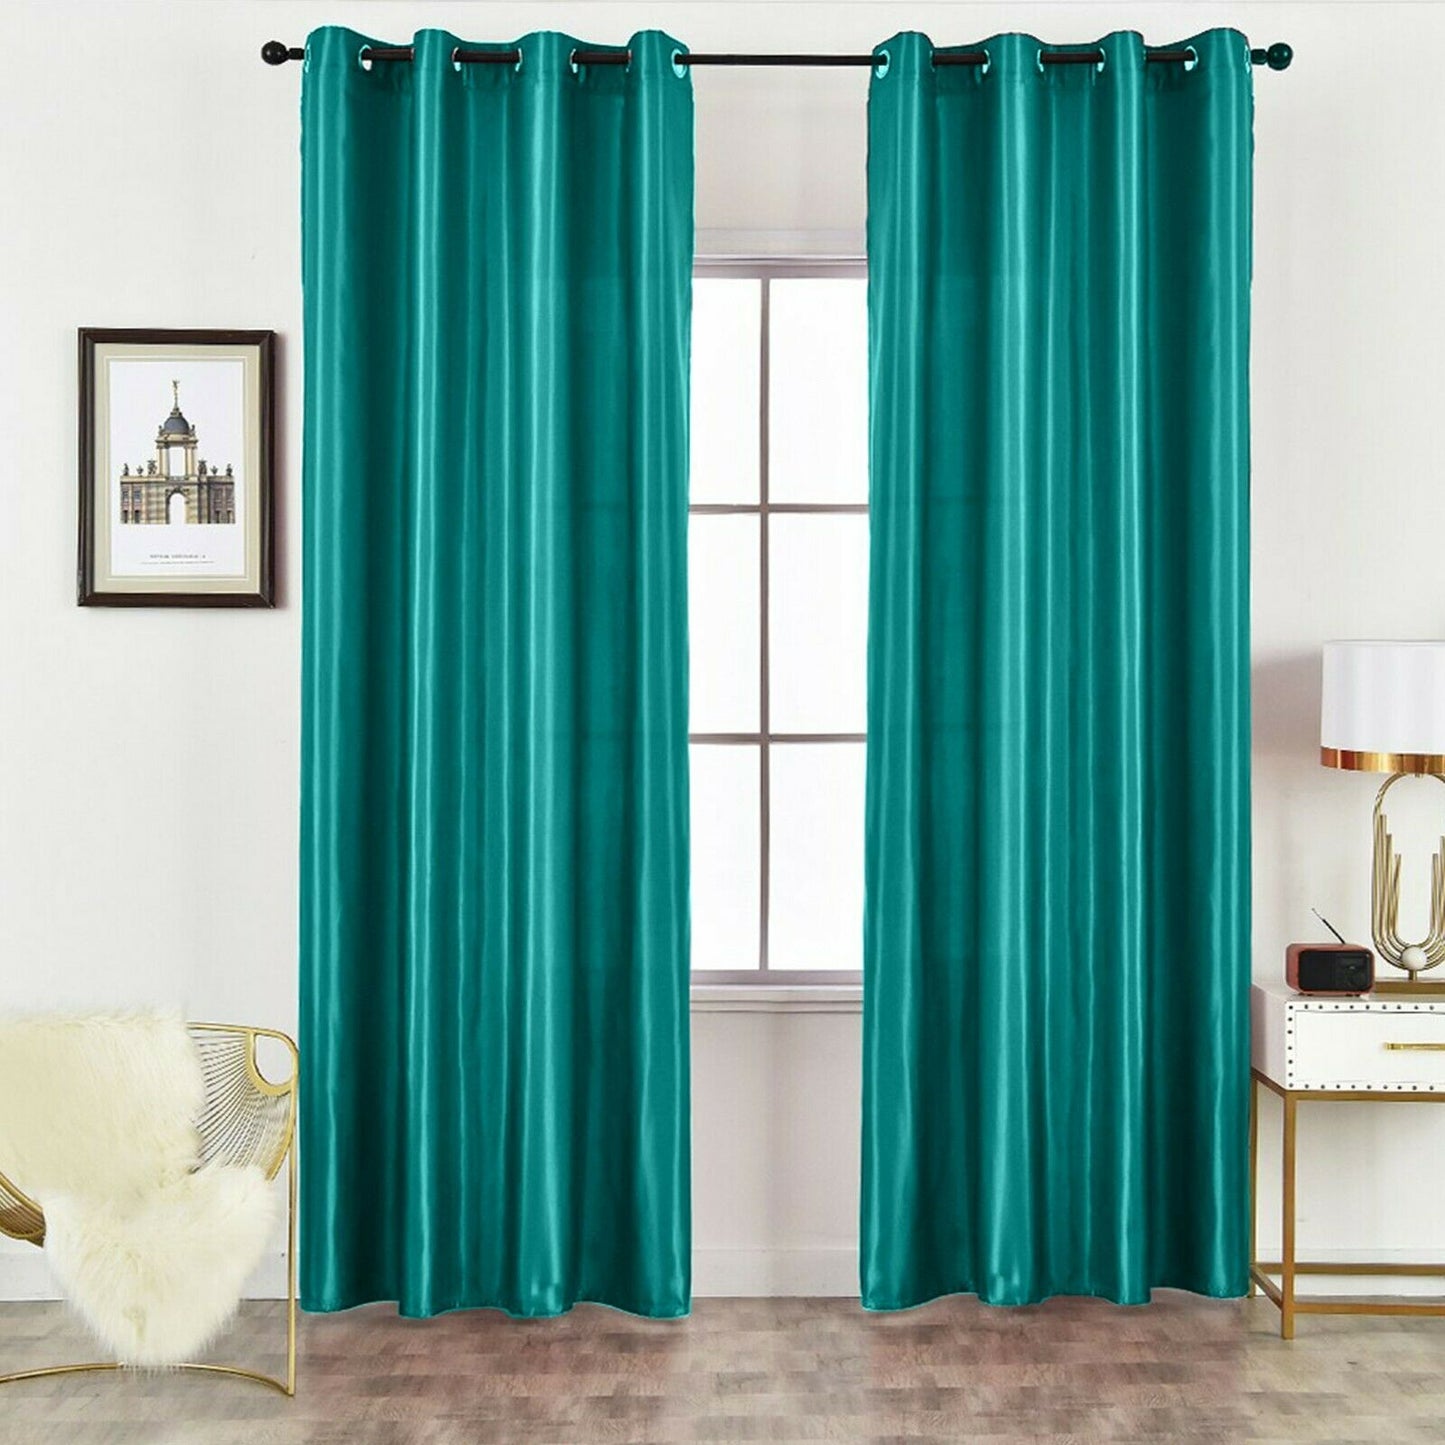 Luxury Faux Silk Eyelet Fully Lined Curtains (Teal)